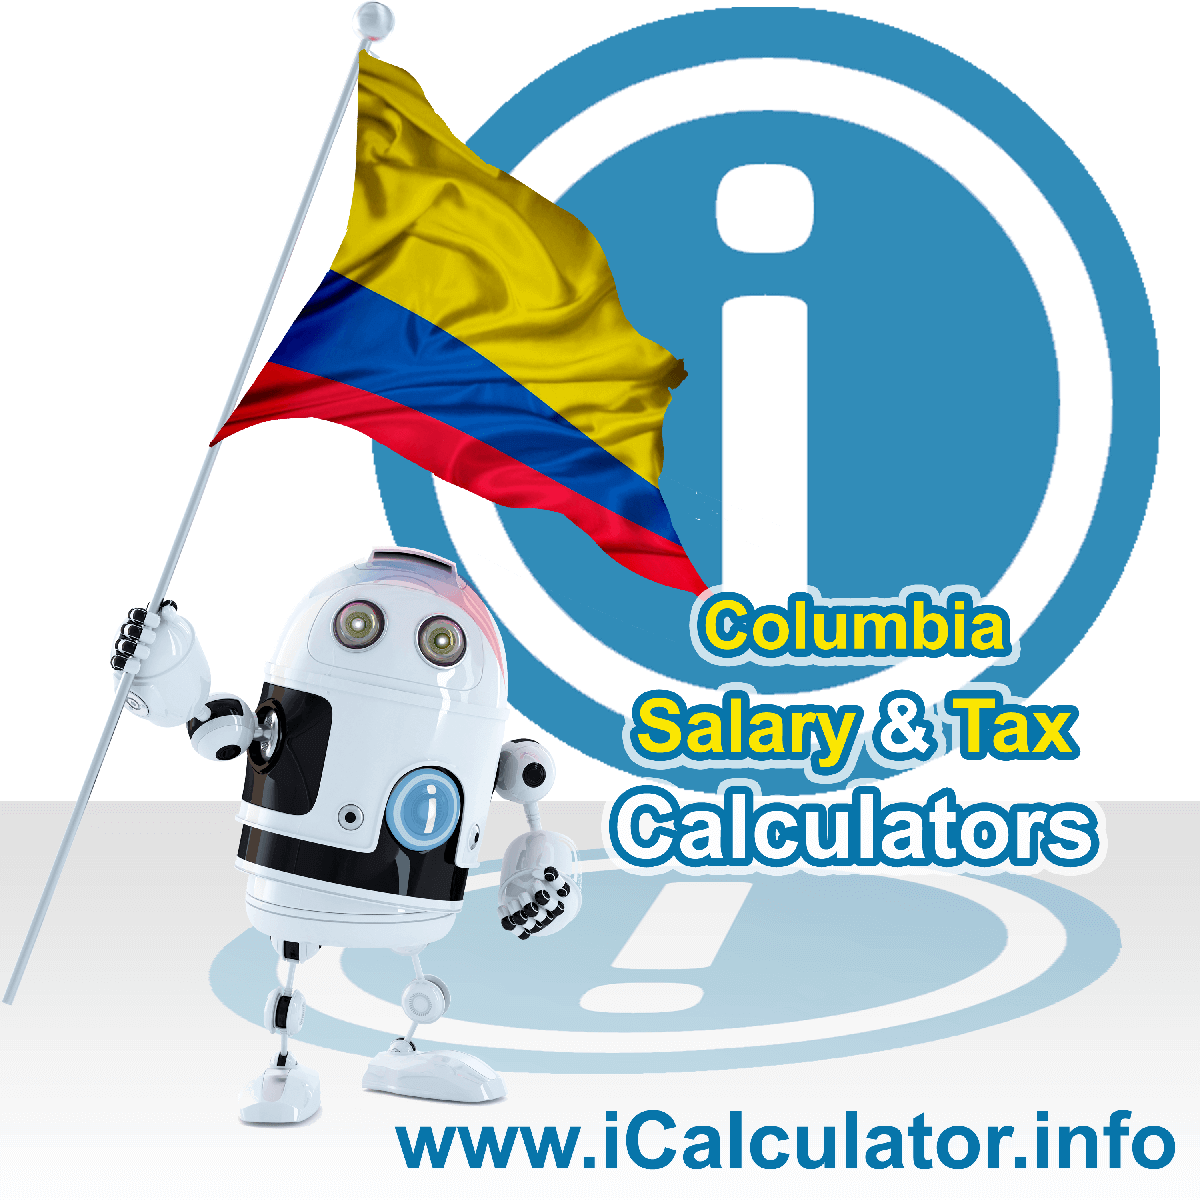 Colombia Tax Calculator. This image shows the Colombia flag and information relating to the tax formula for the Colombia Salary Calculator